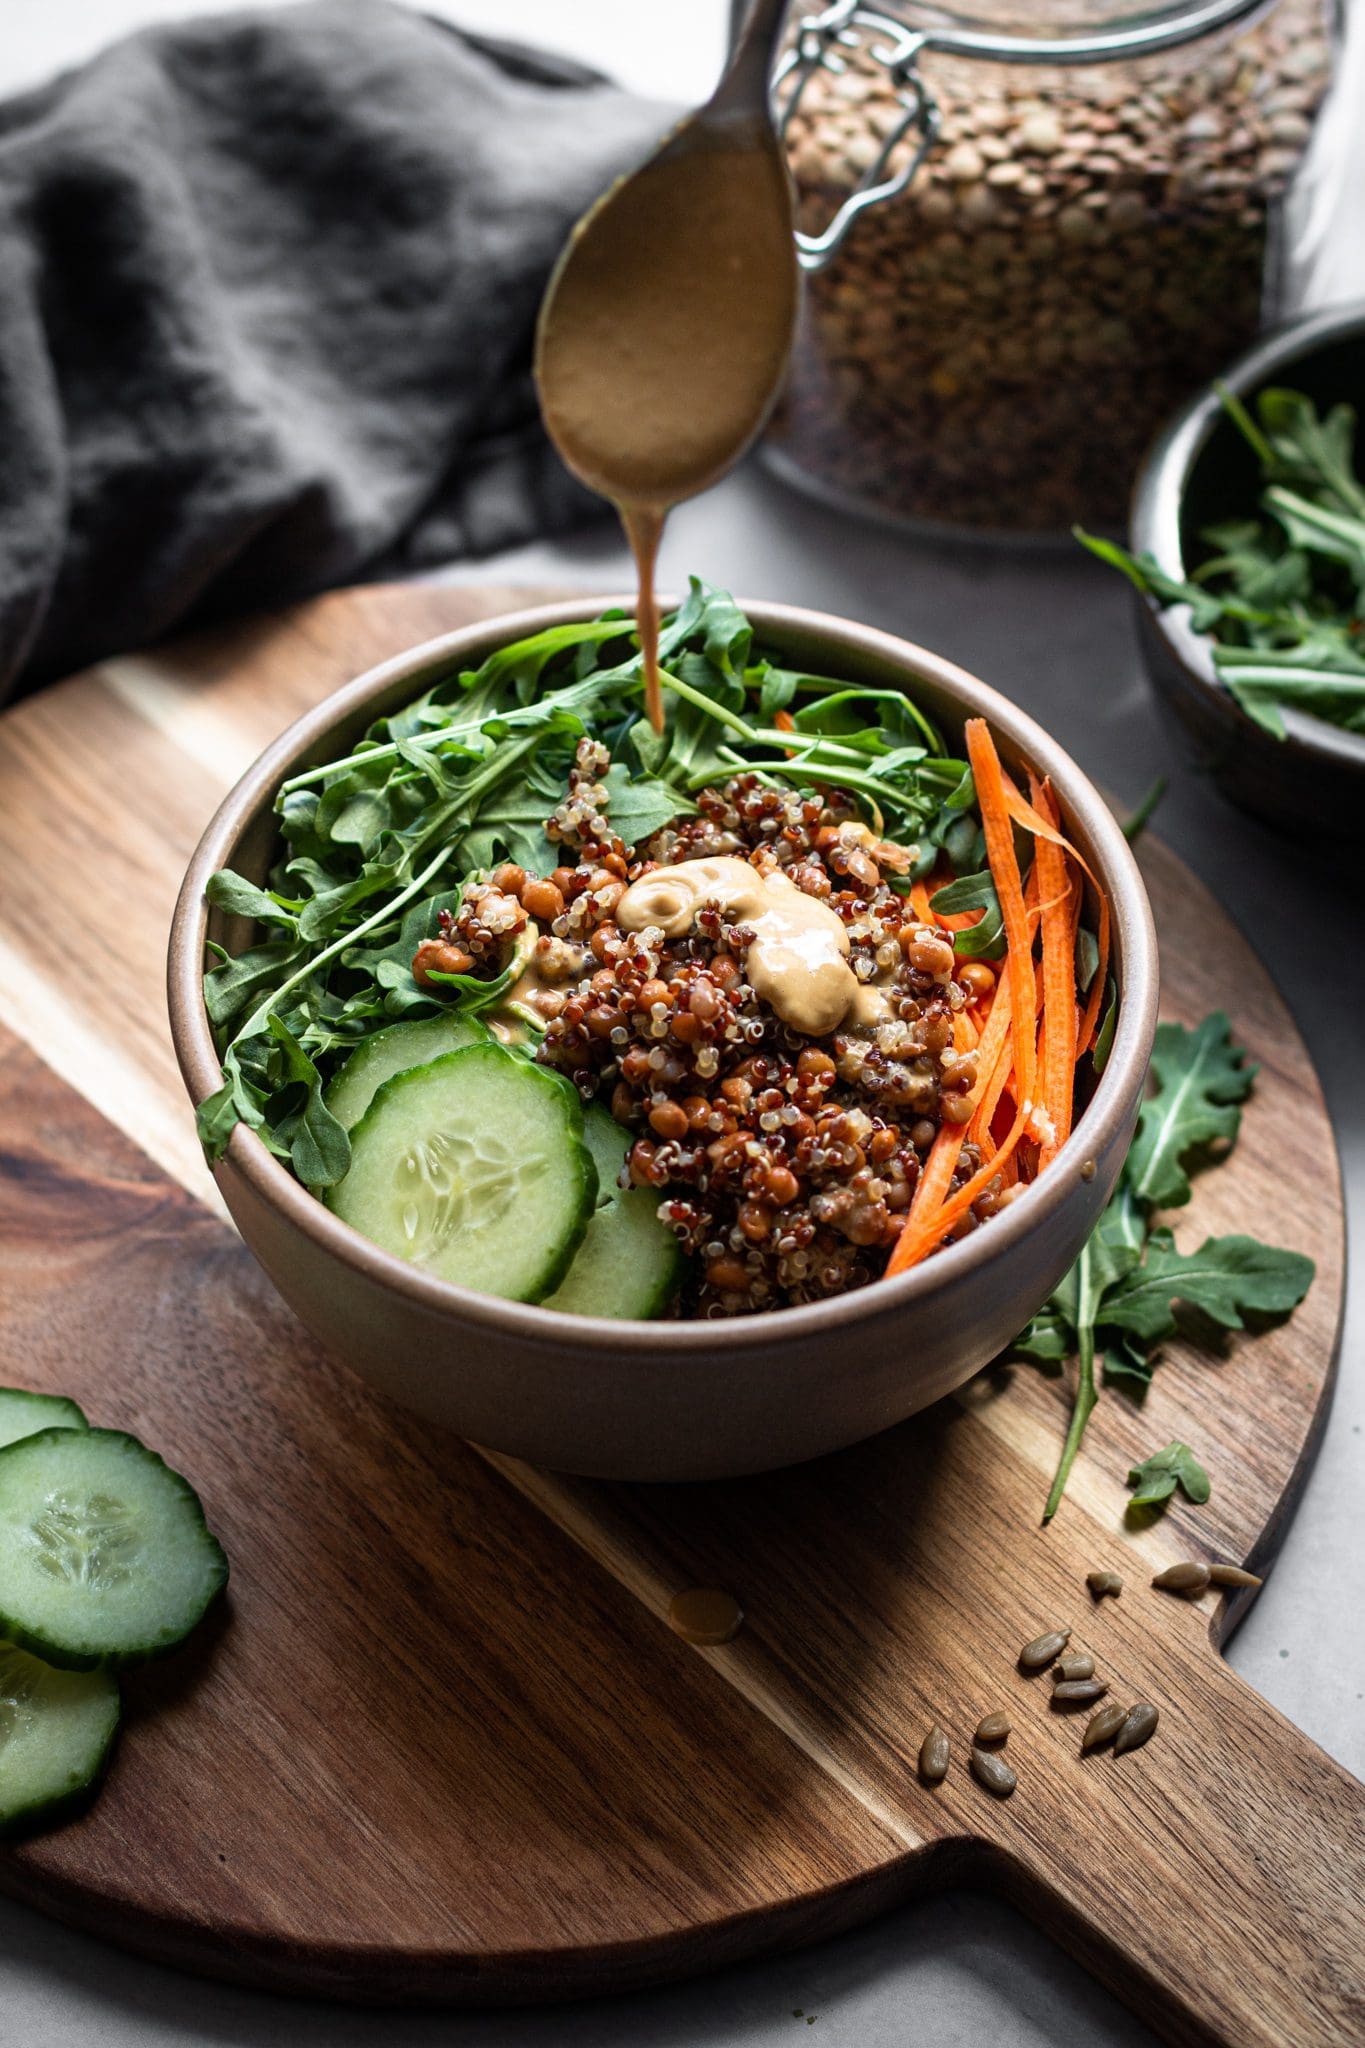 Lentil Quinoa Salad with Nutritional Yeast Dressing